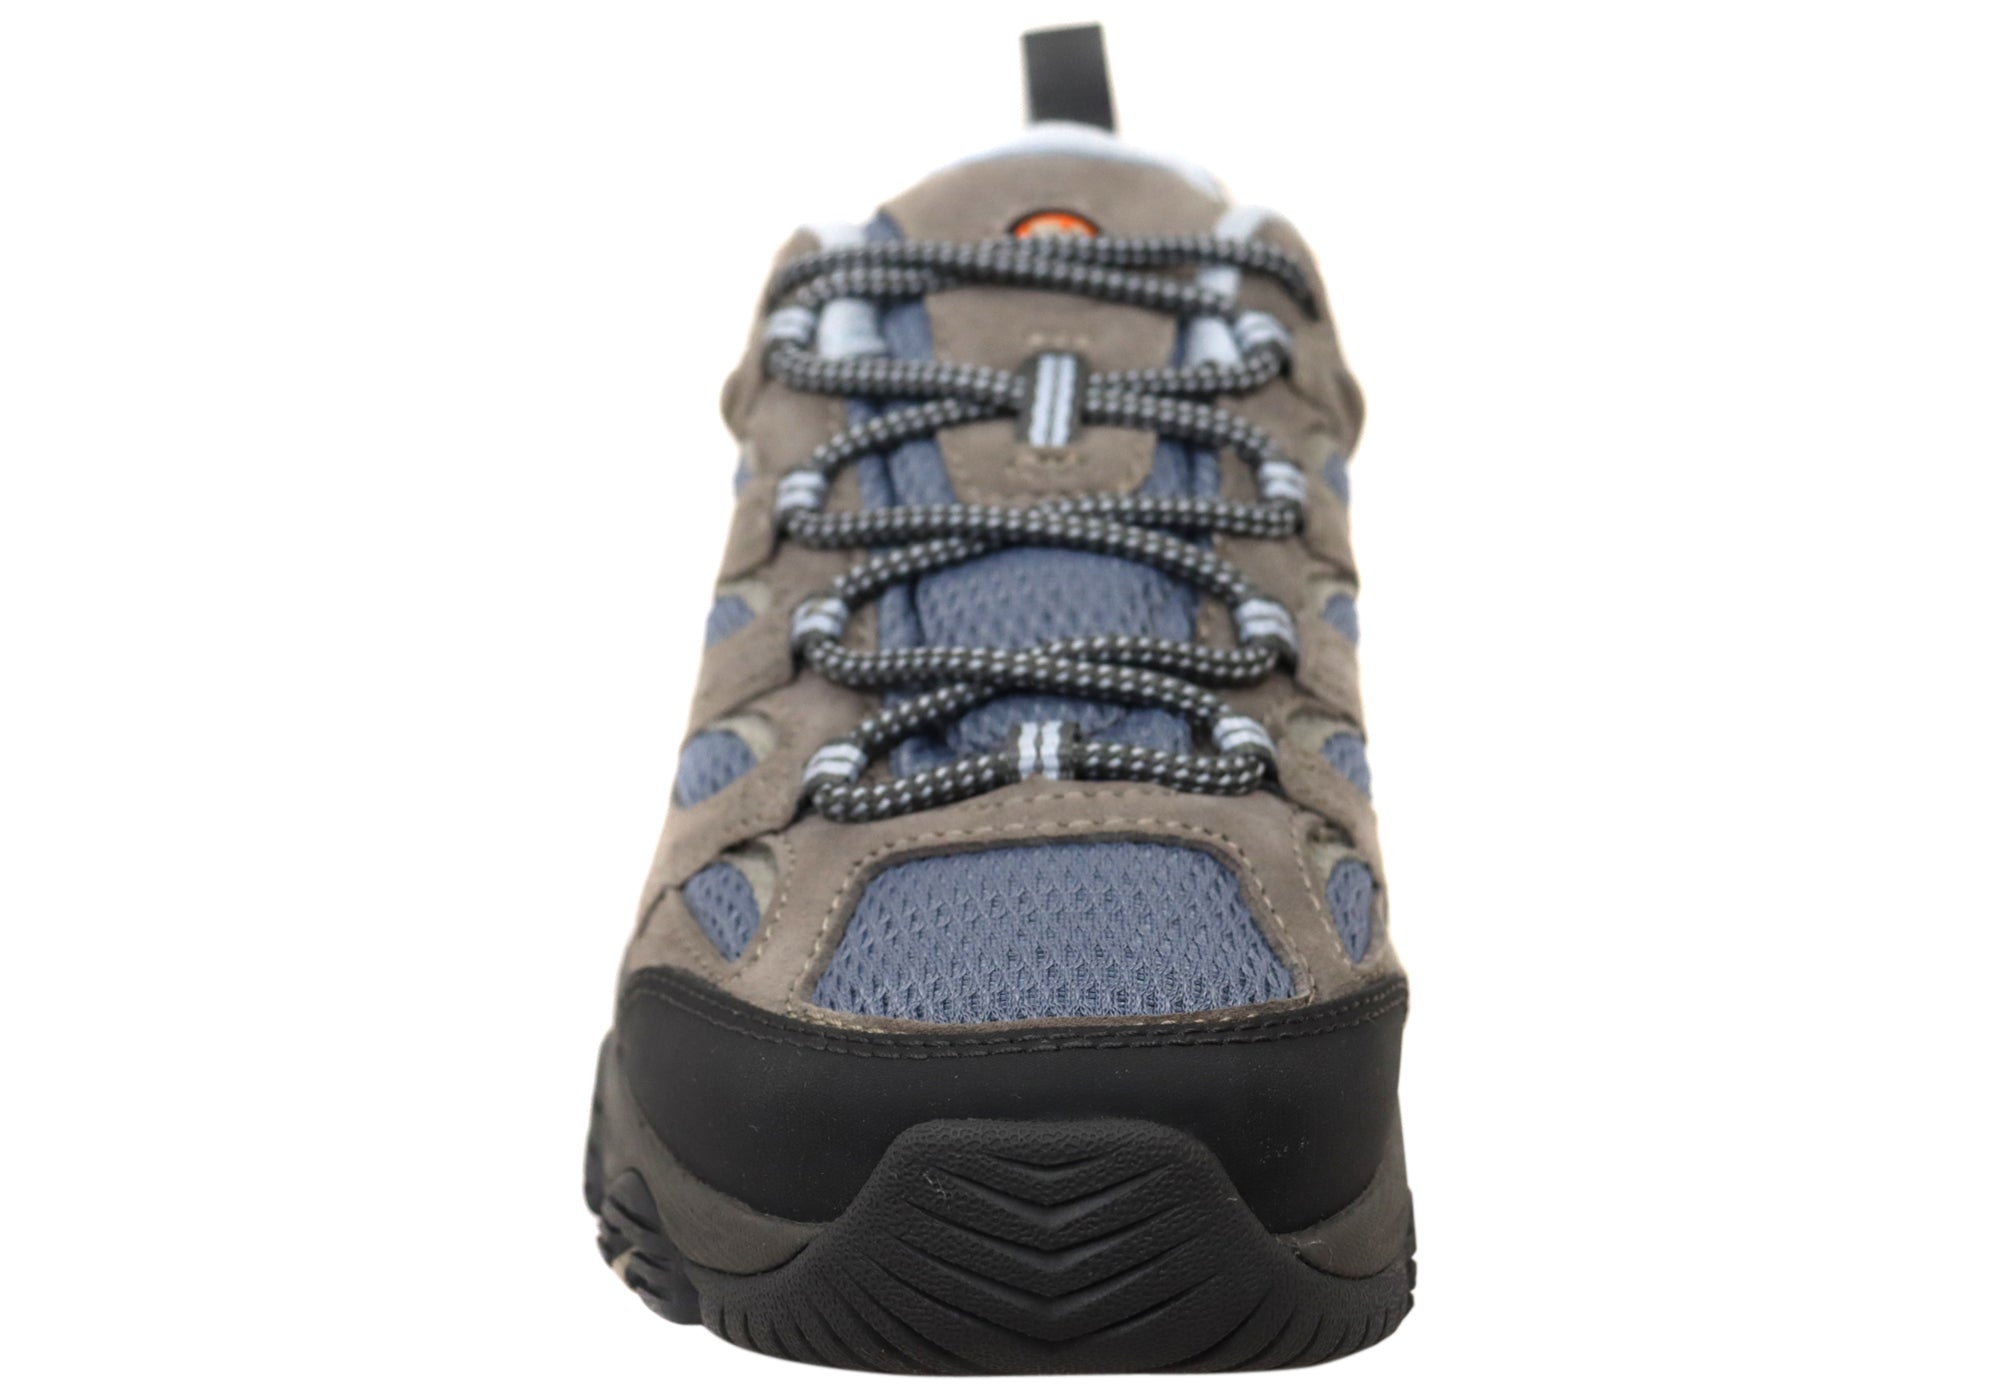 Merrell Womens Moab 3 Wide Width Comfortable Leather Hiking Shoes